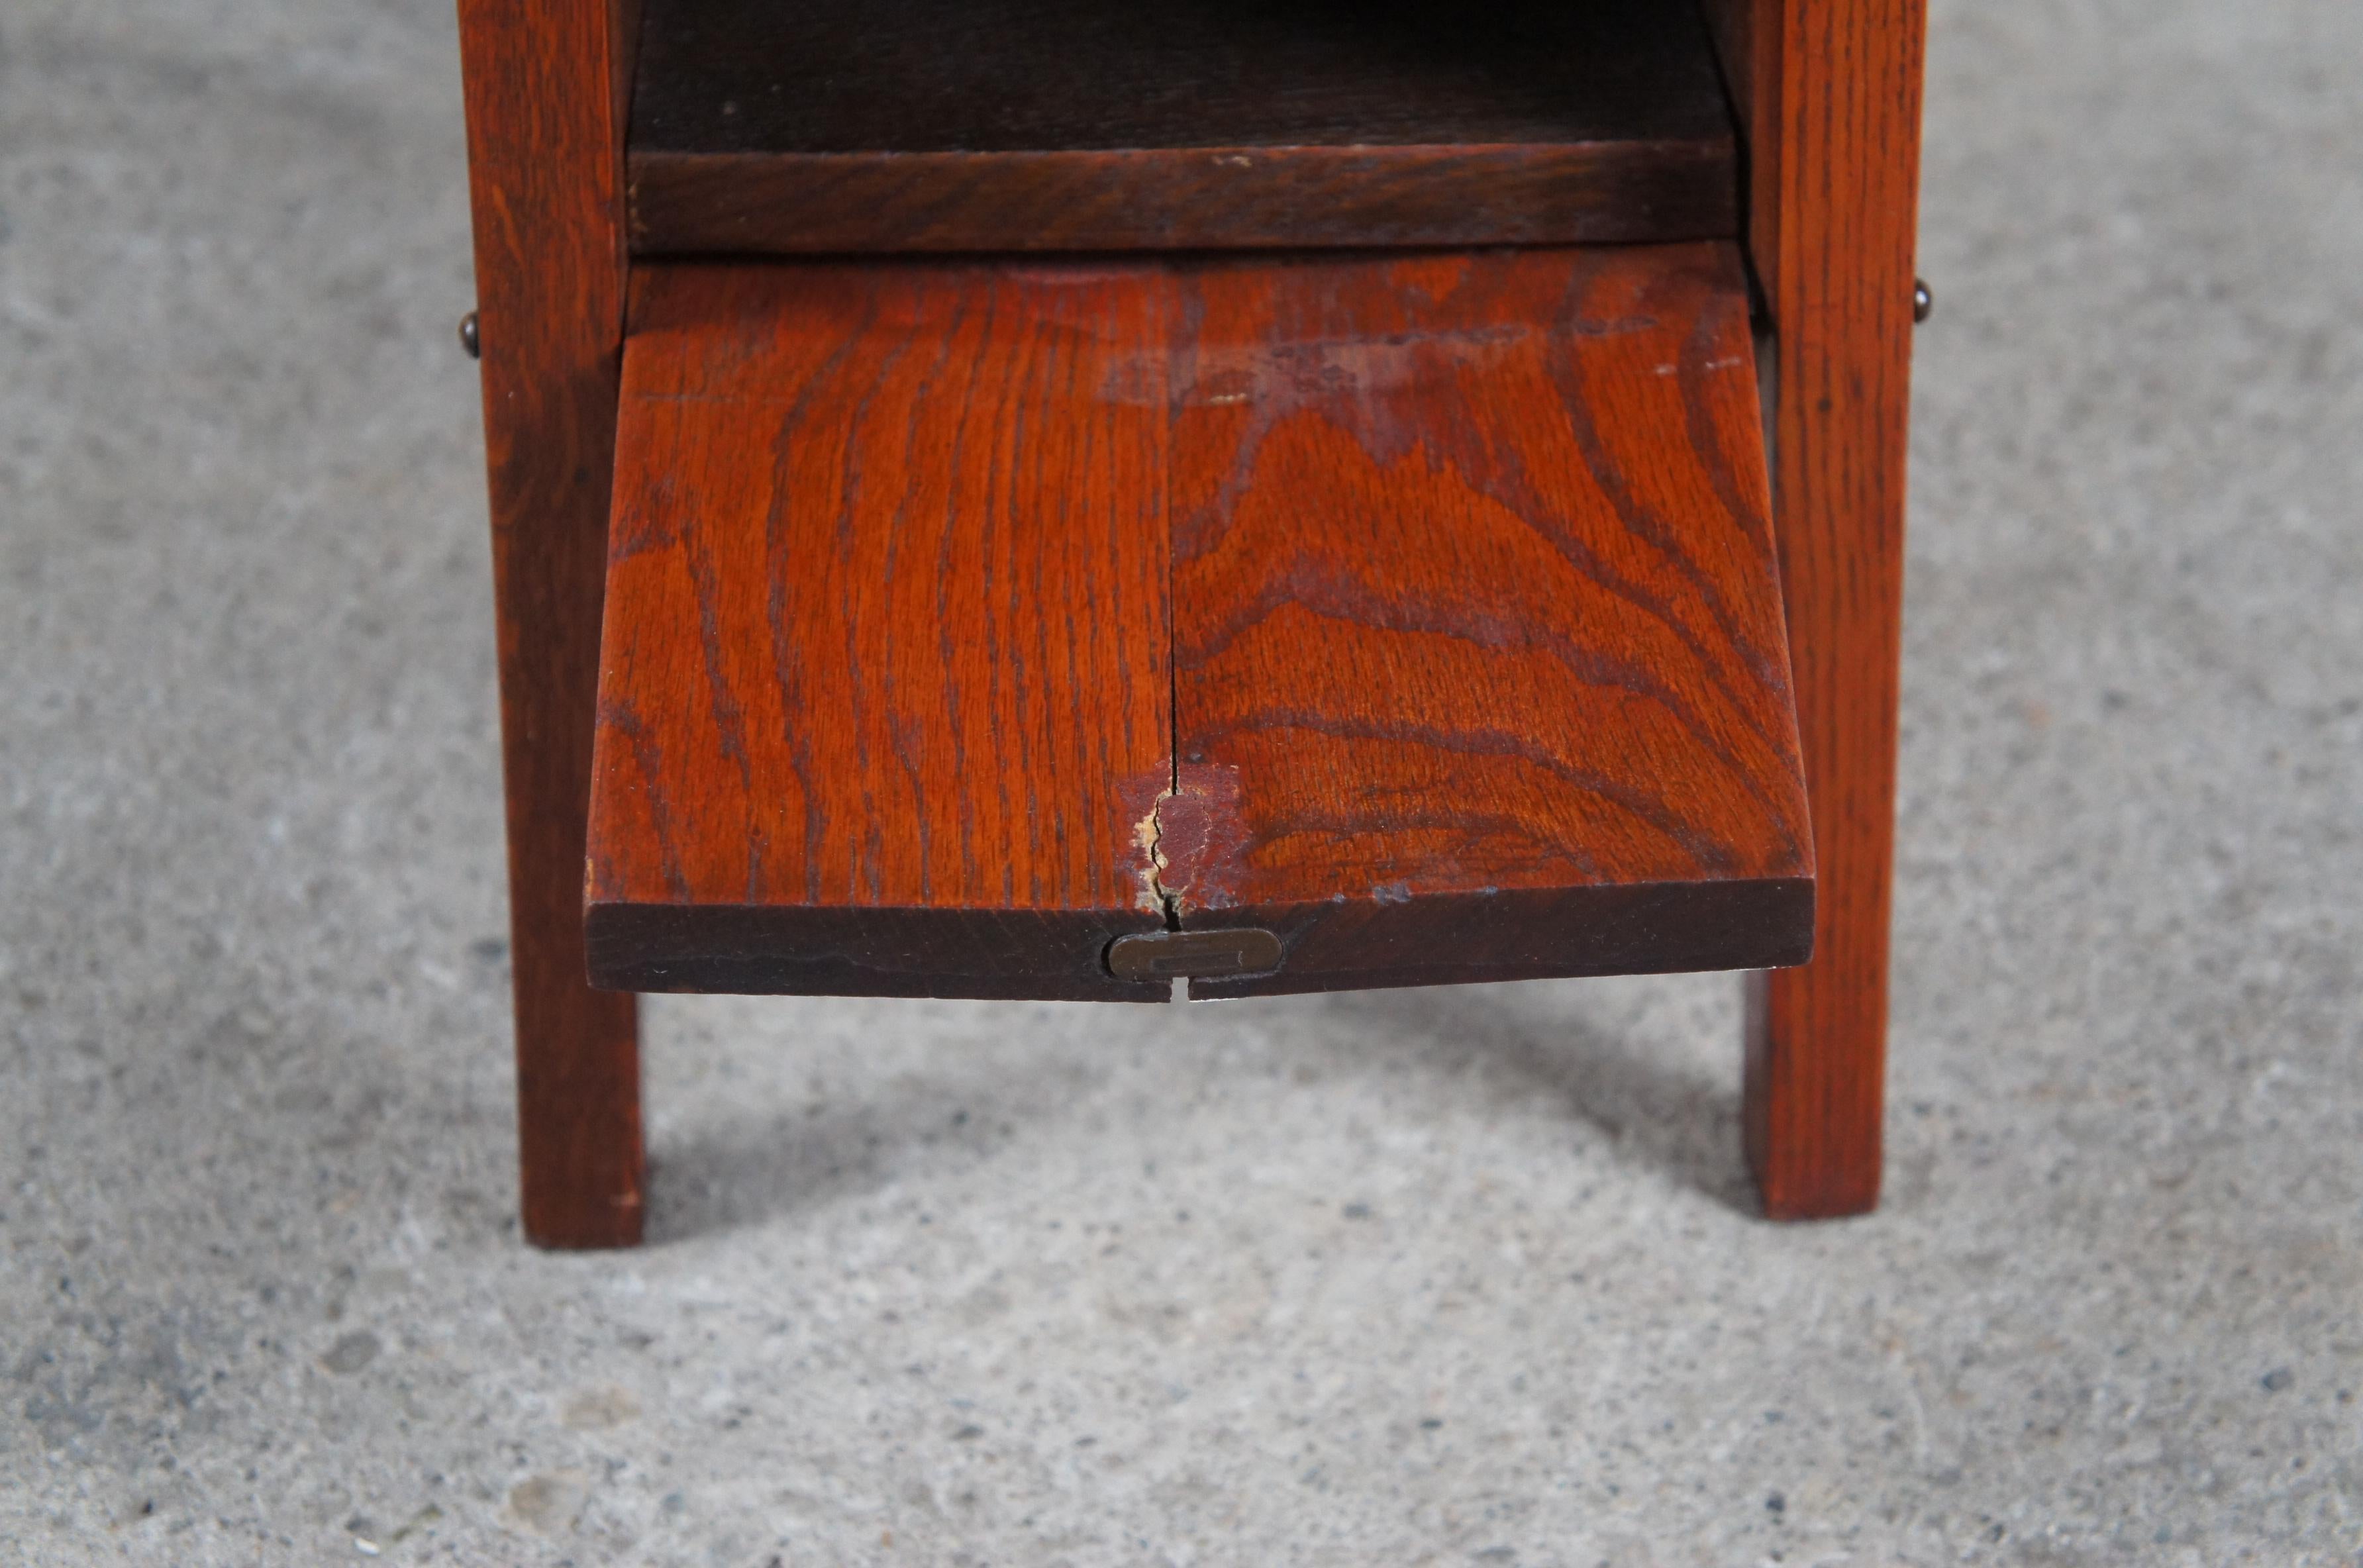 North American Antique Mission Arts & Crafts Red Oak Tiered Smoking Stand Pedestal Side Table